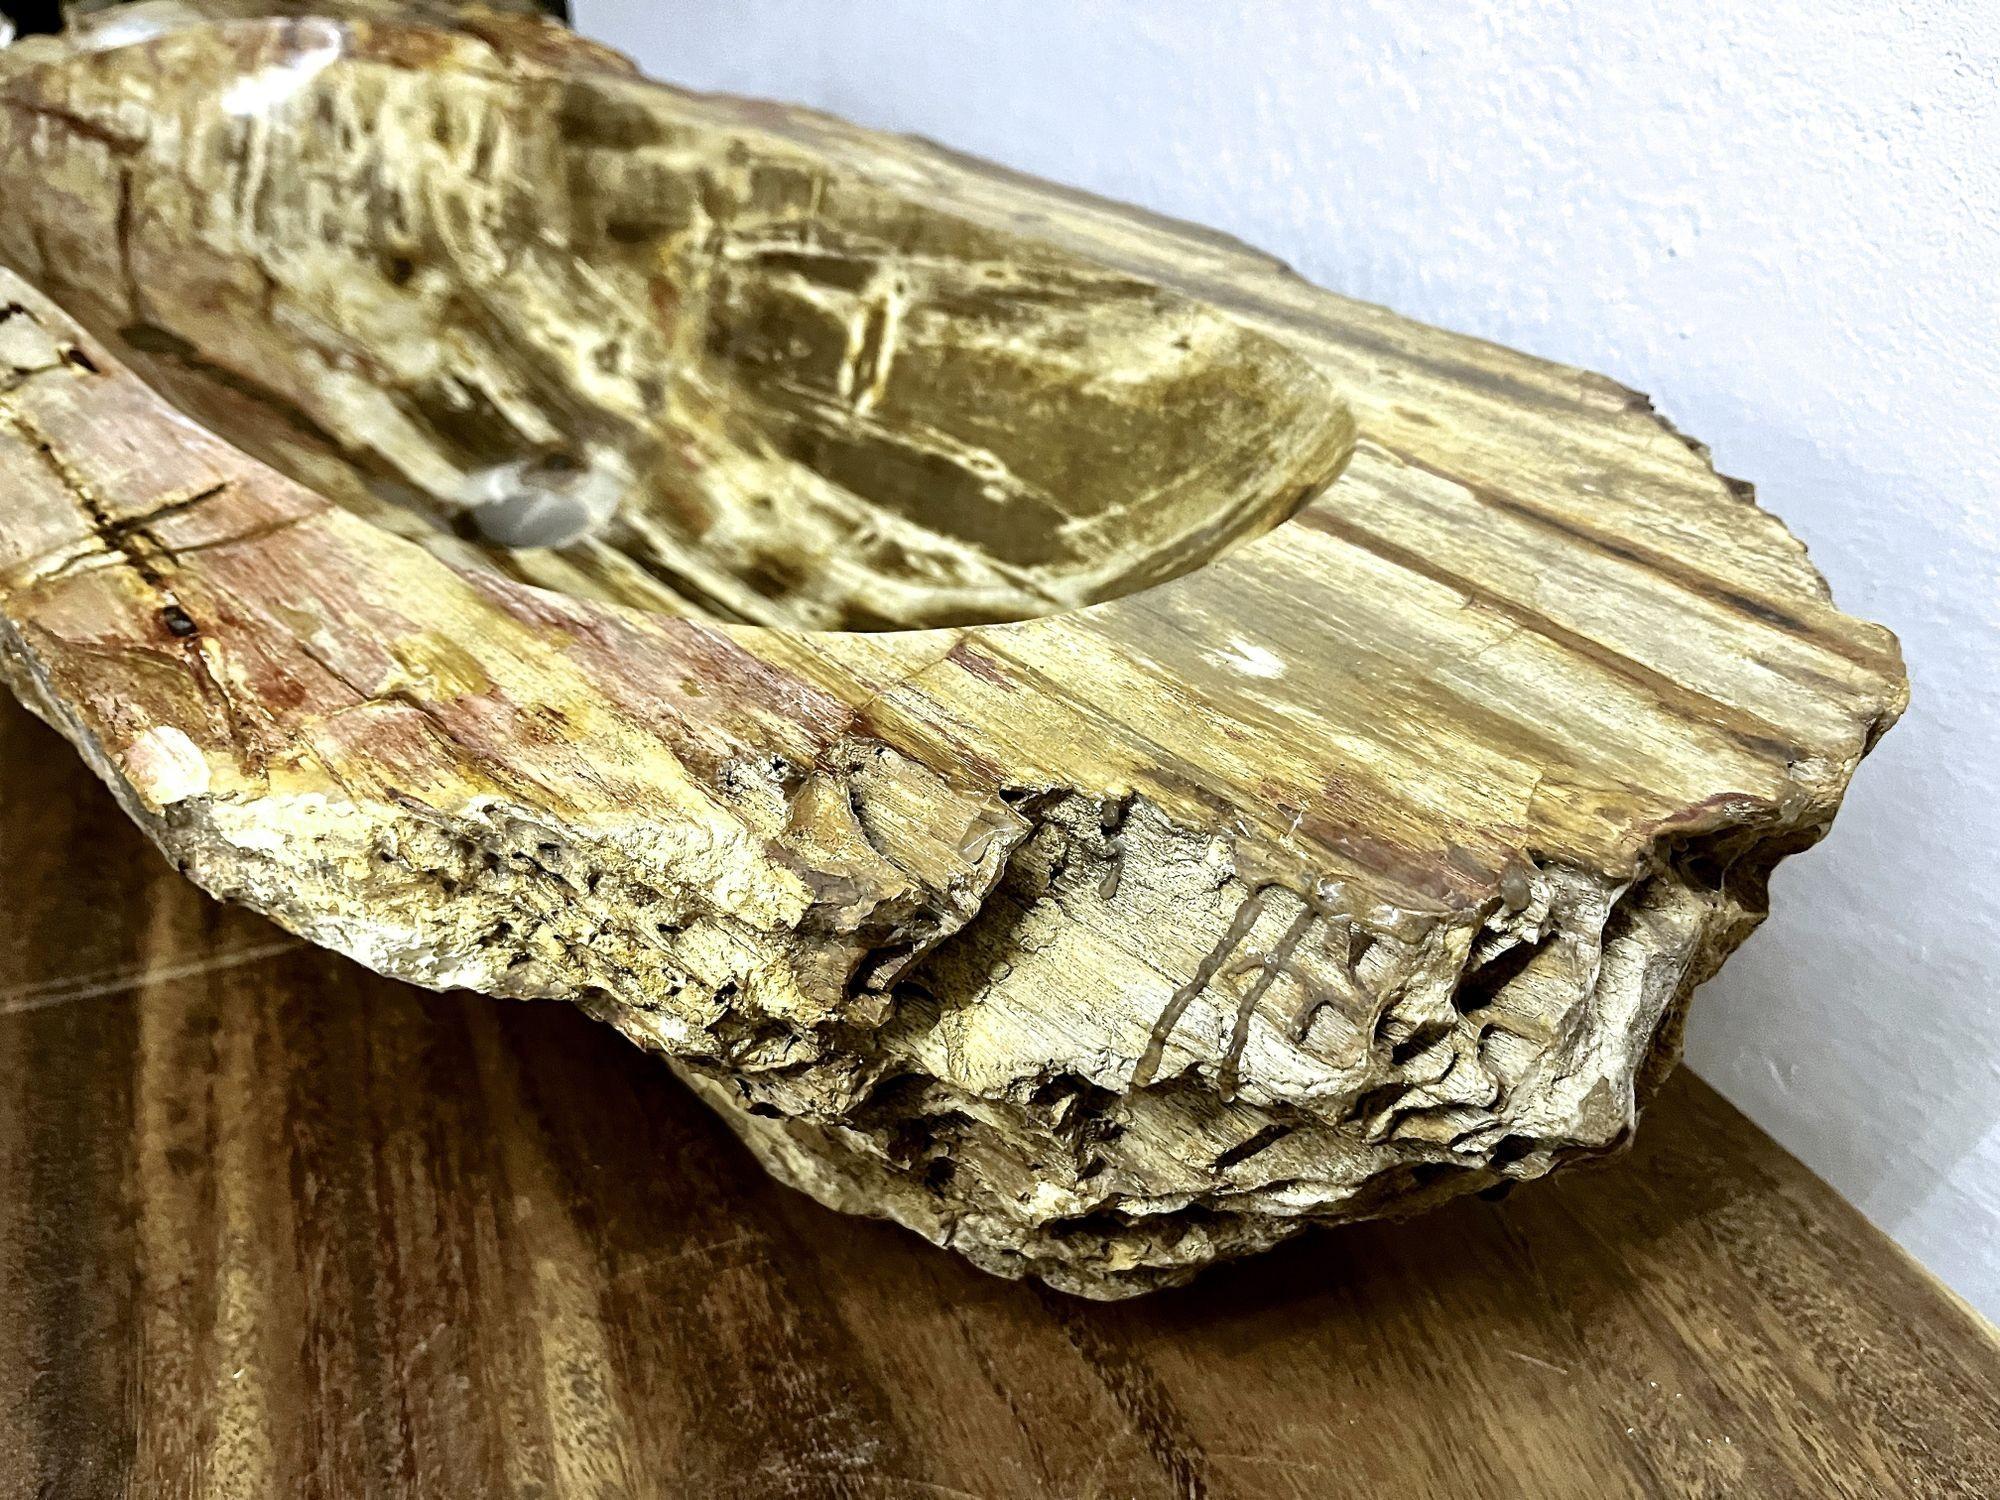 Outstanding large petrified wood sink in absolute top quality with polished basin. The unique natural built pattern with an exceptional coloration in beige, brown and pink tones is absolutely matchless. A one of a kind piece elaborately worked out